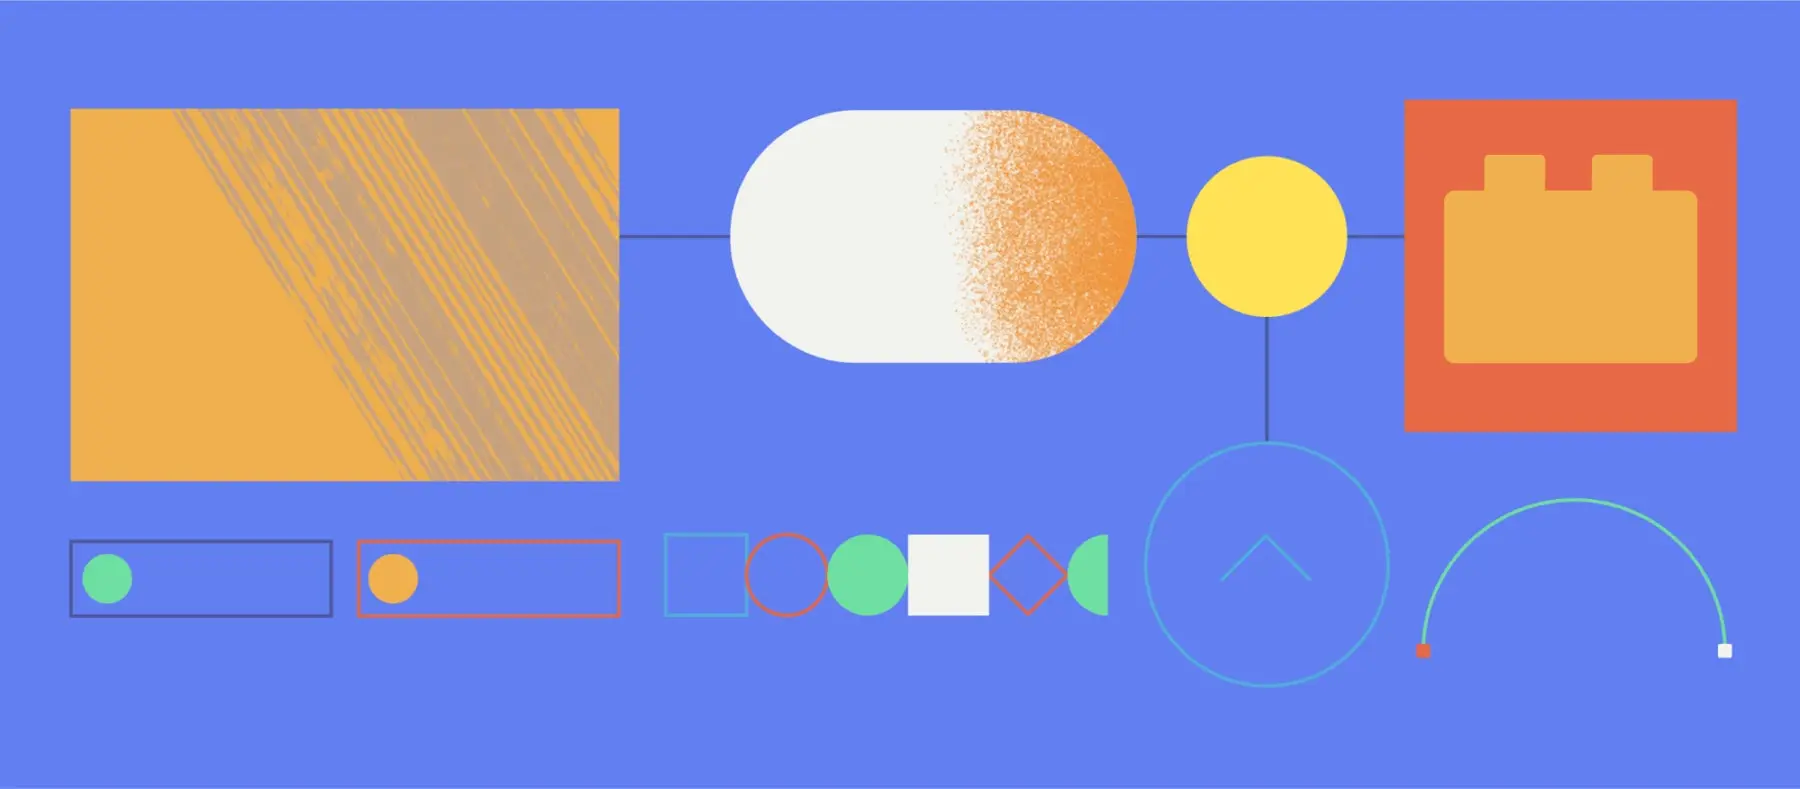 A graphic illustration of components in a design system.